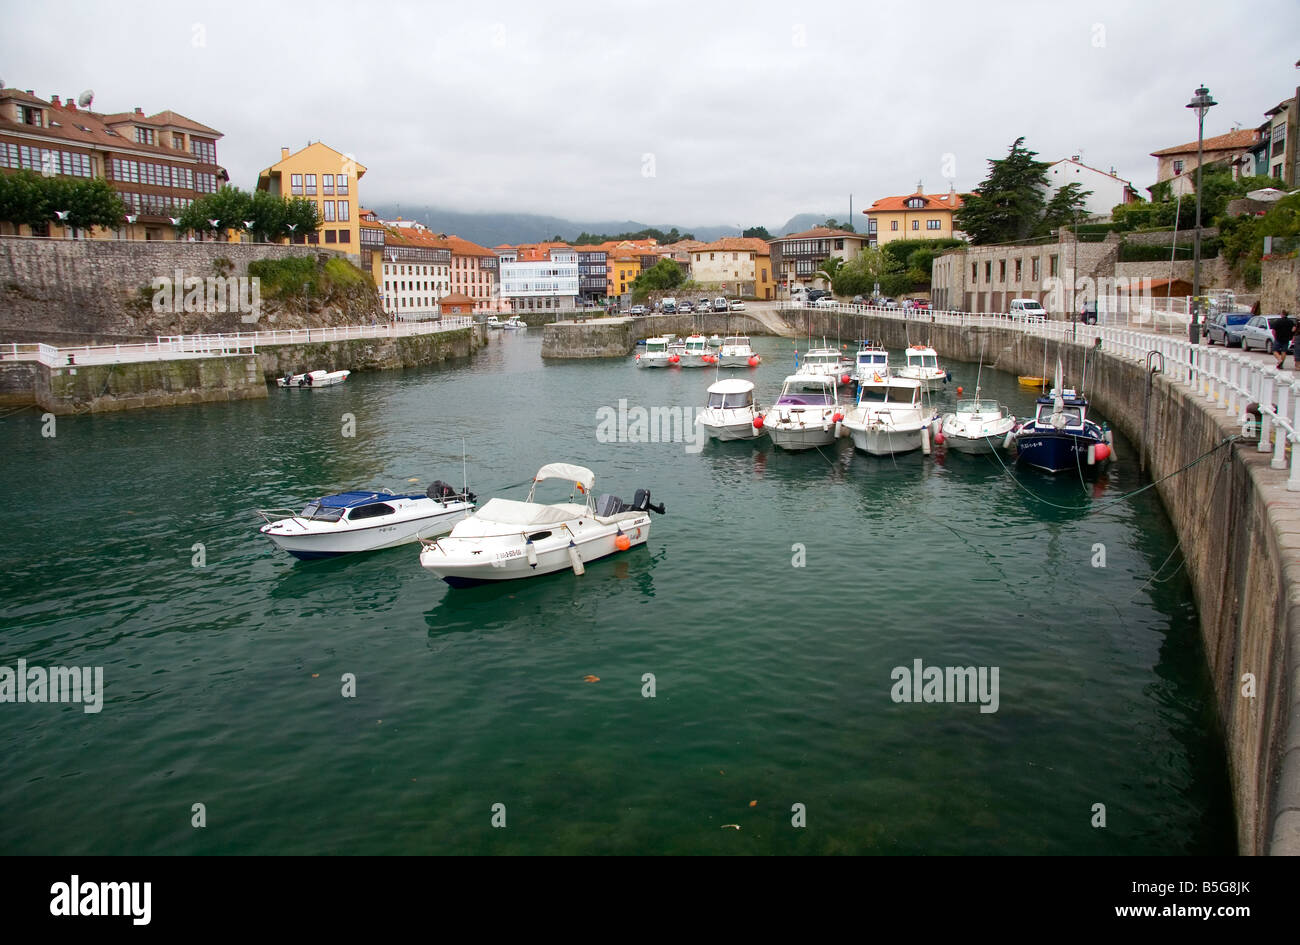 High tide in the harbor at Llanes Asturias Spain Stock Photo